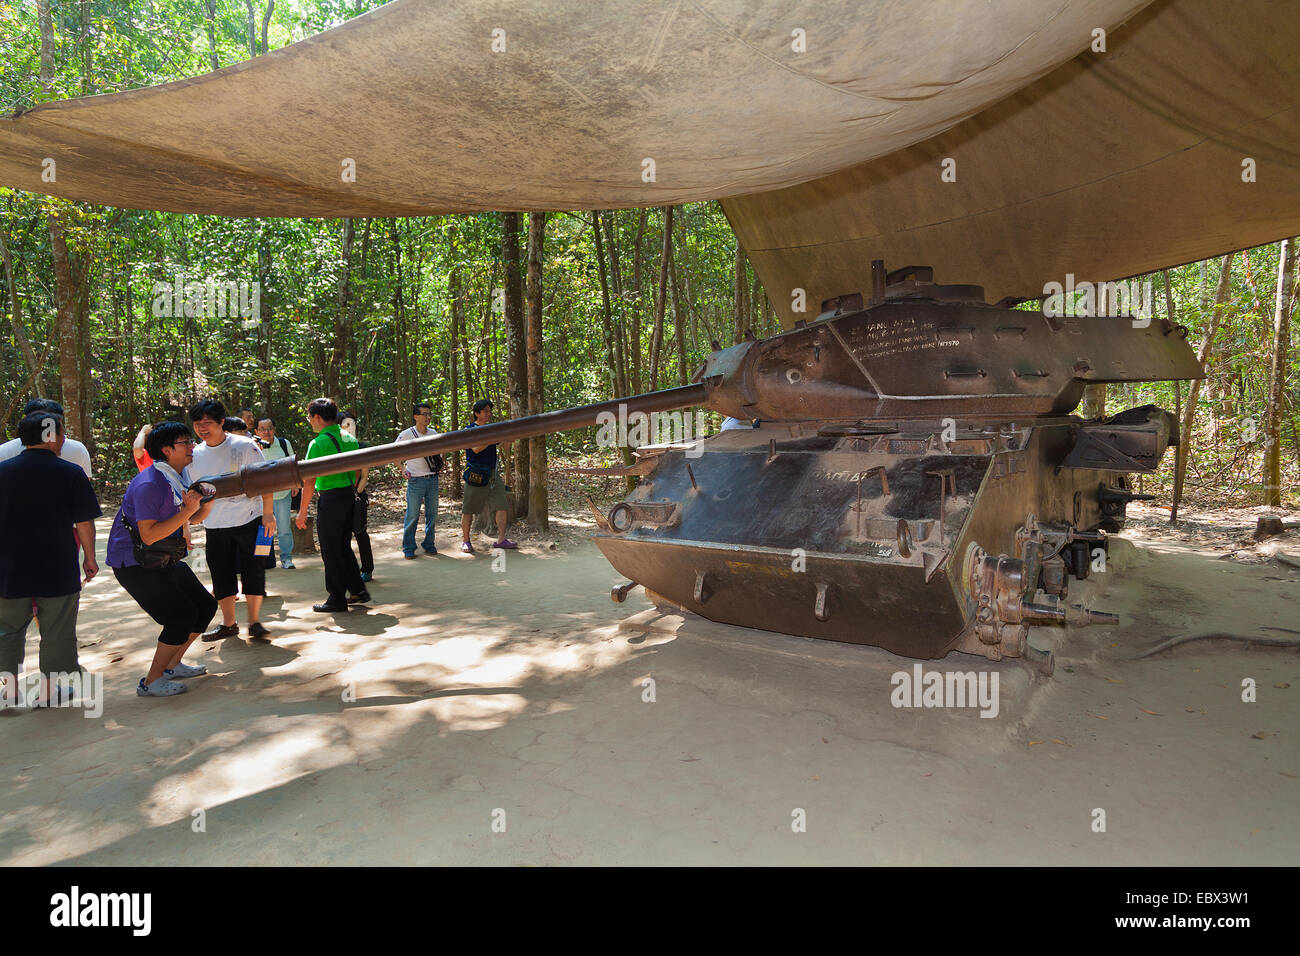 Cu Chi Tunnels near Vietnam display of an American tank that was used during the Vietnam War. Stock Photo